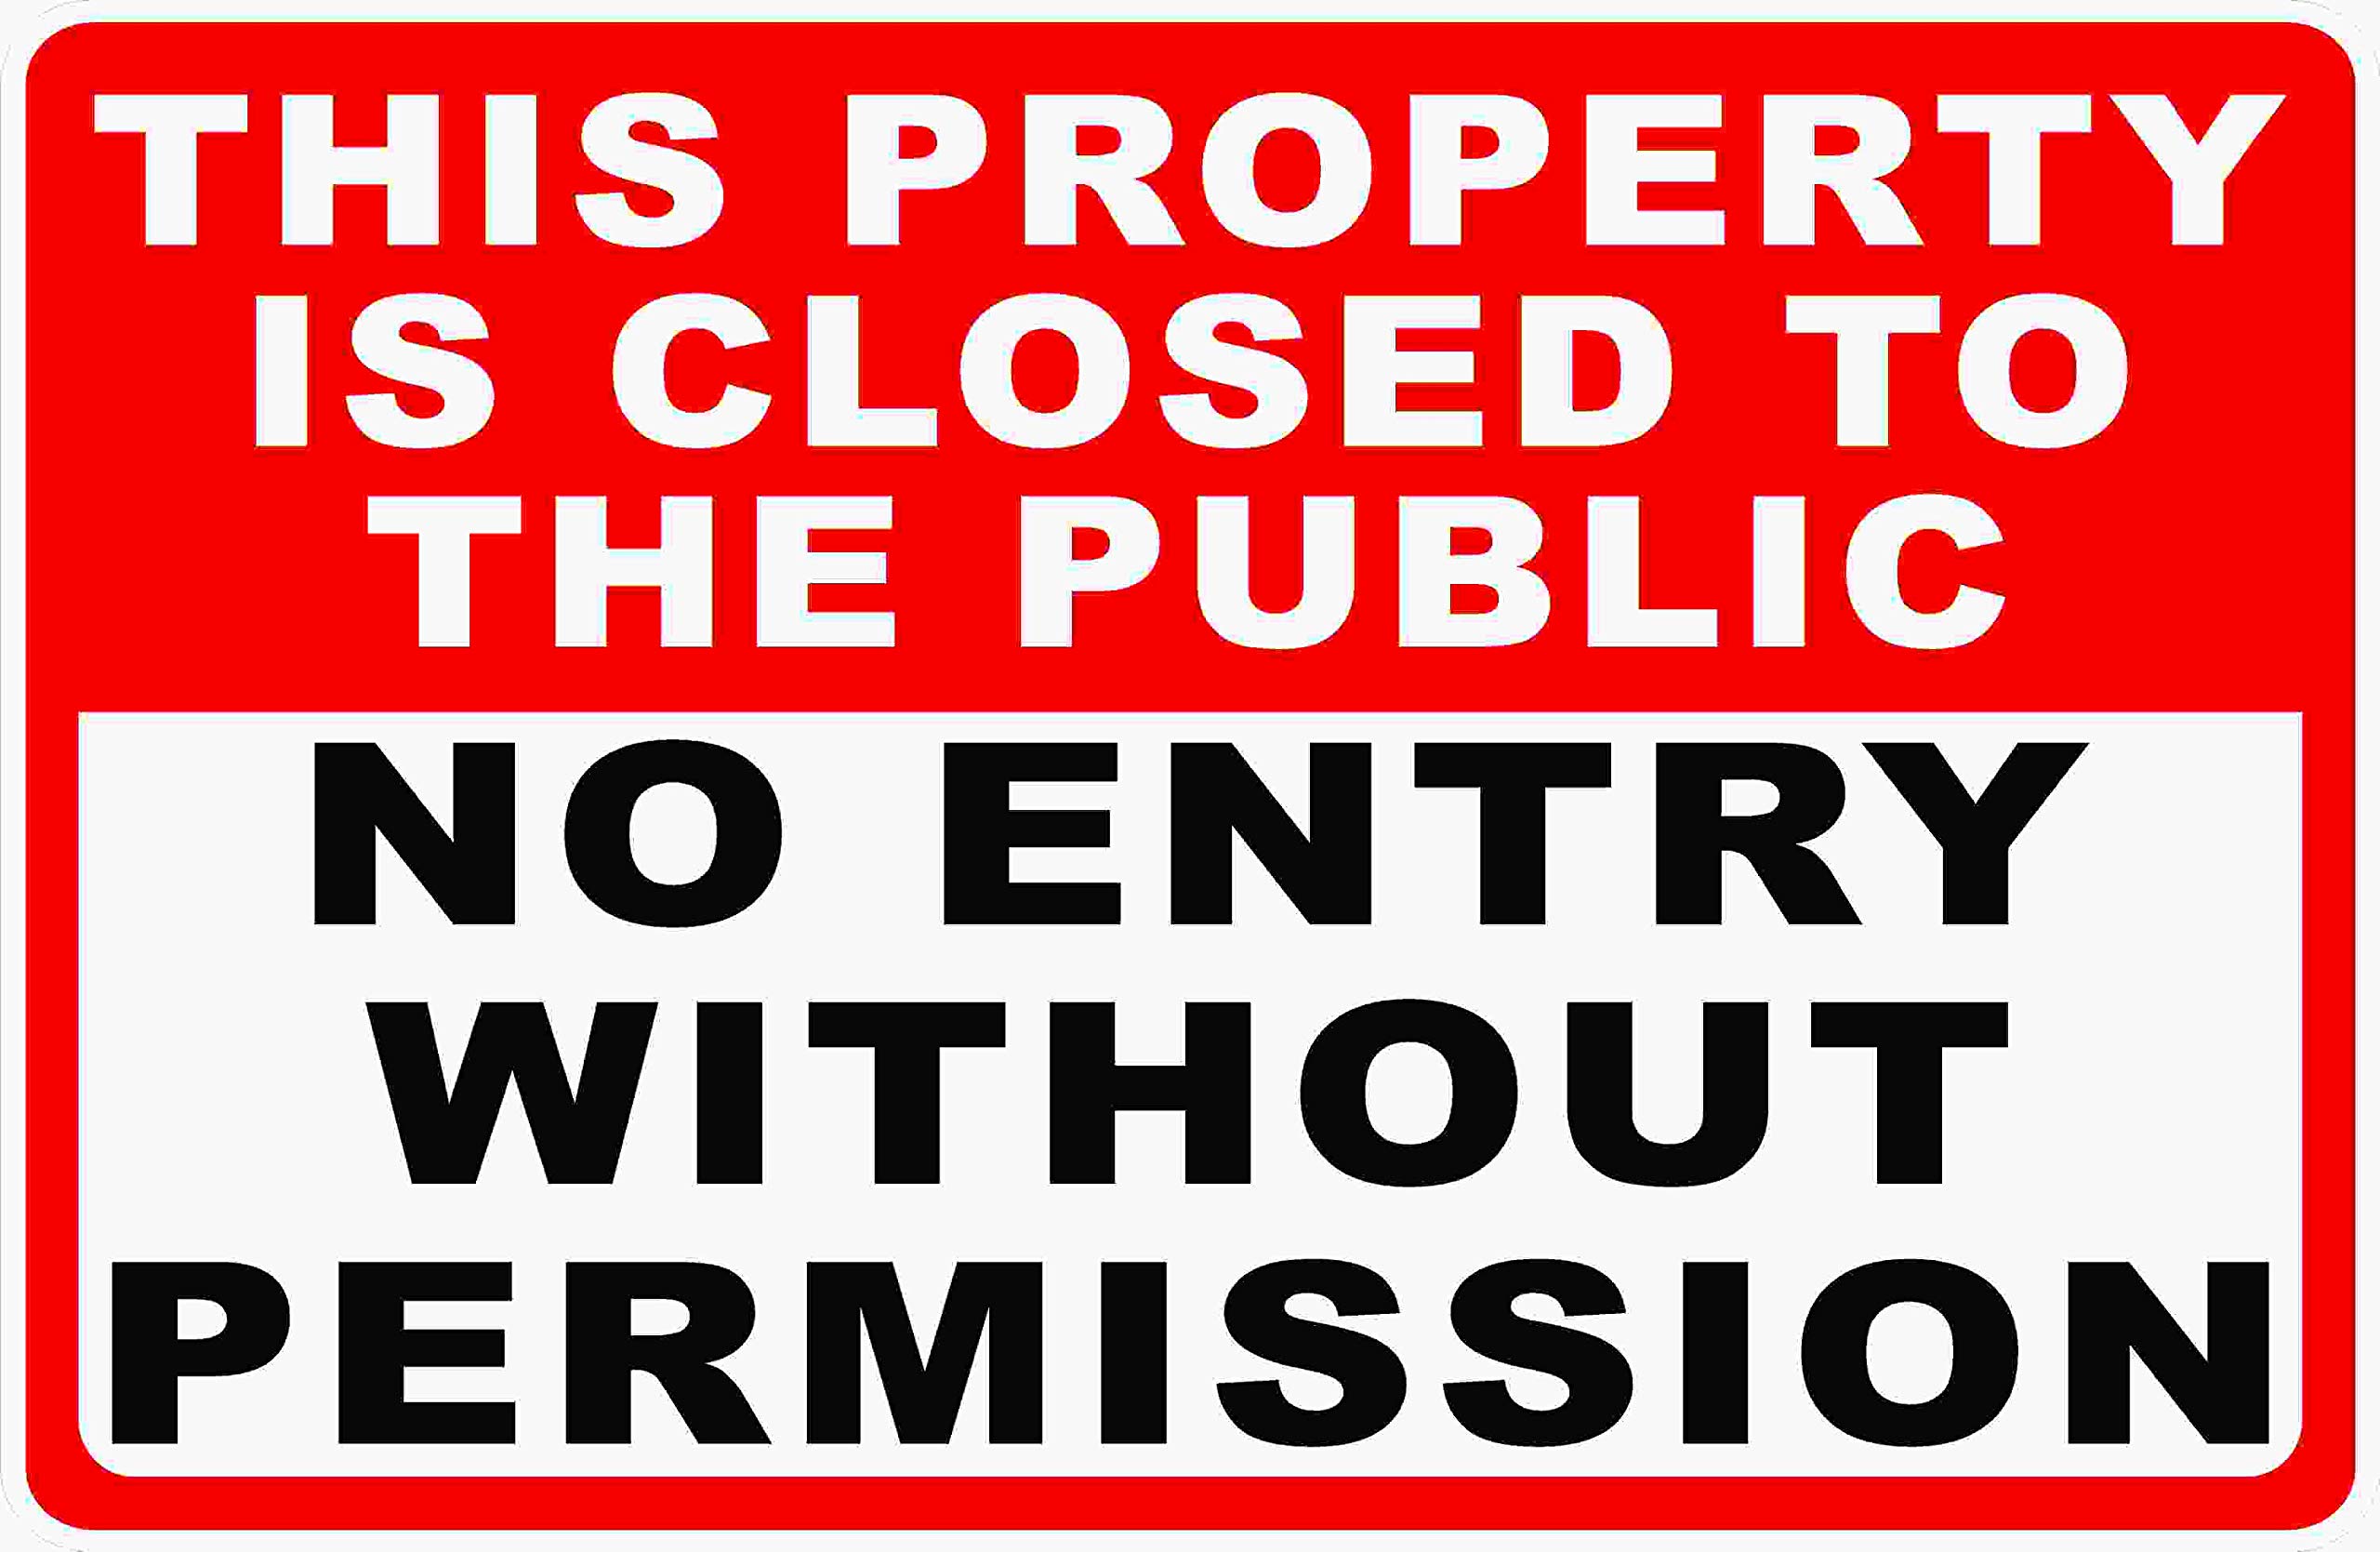 This Property Closed to Public No Entry Without Permission Sign. 12x18 Metal. No Public Access Signs